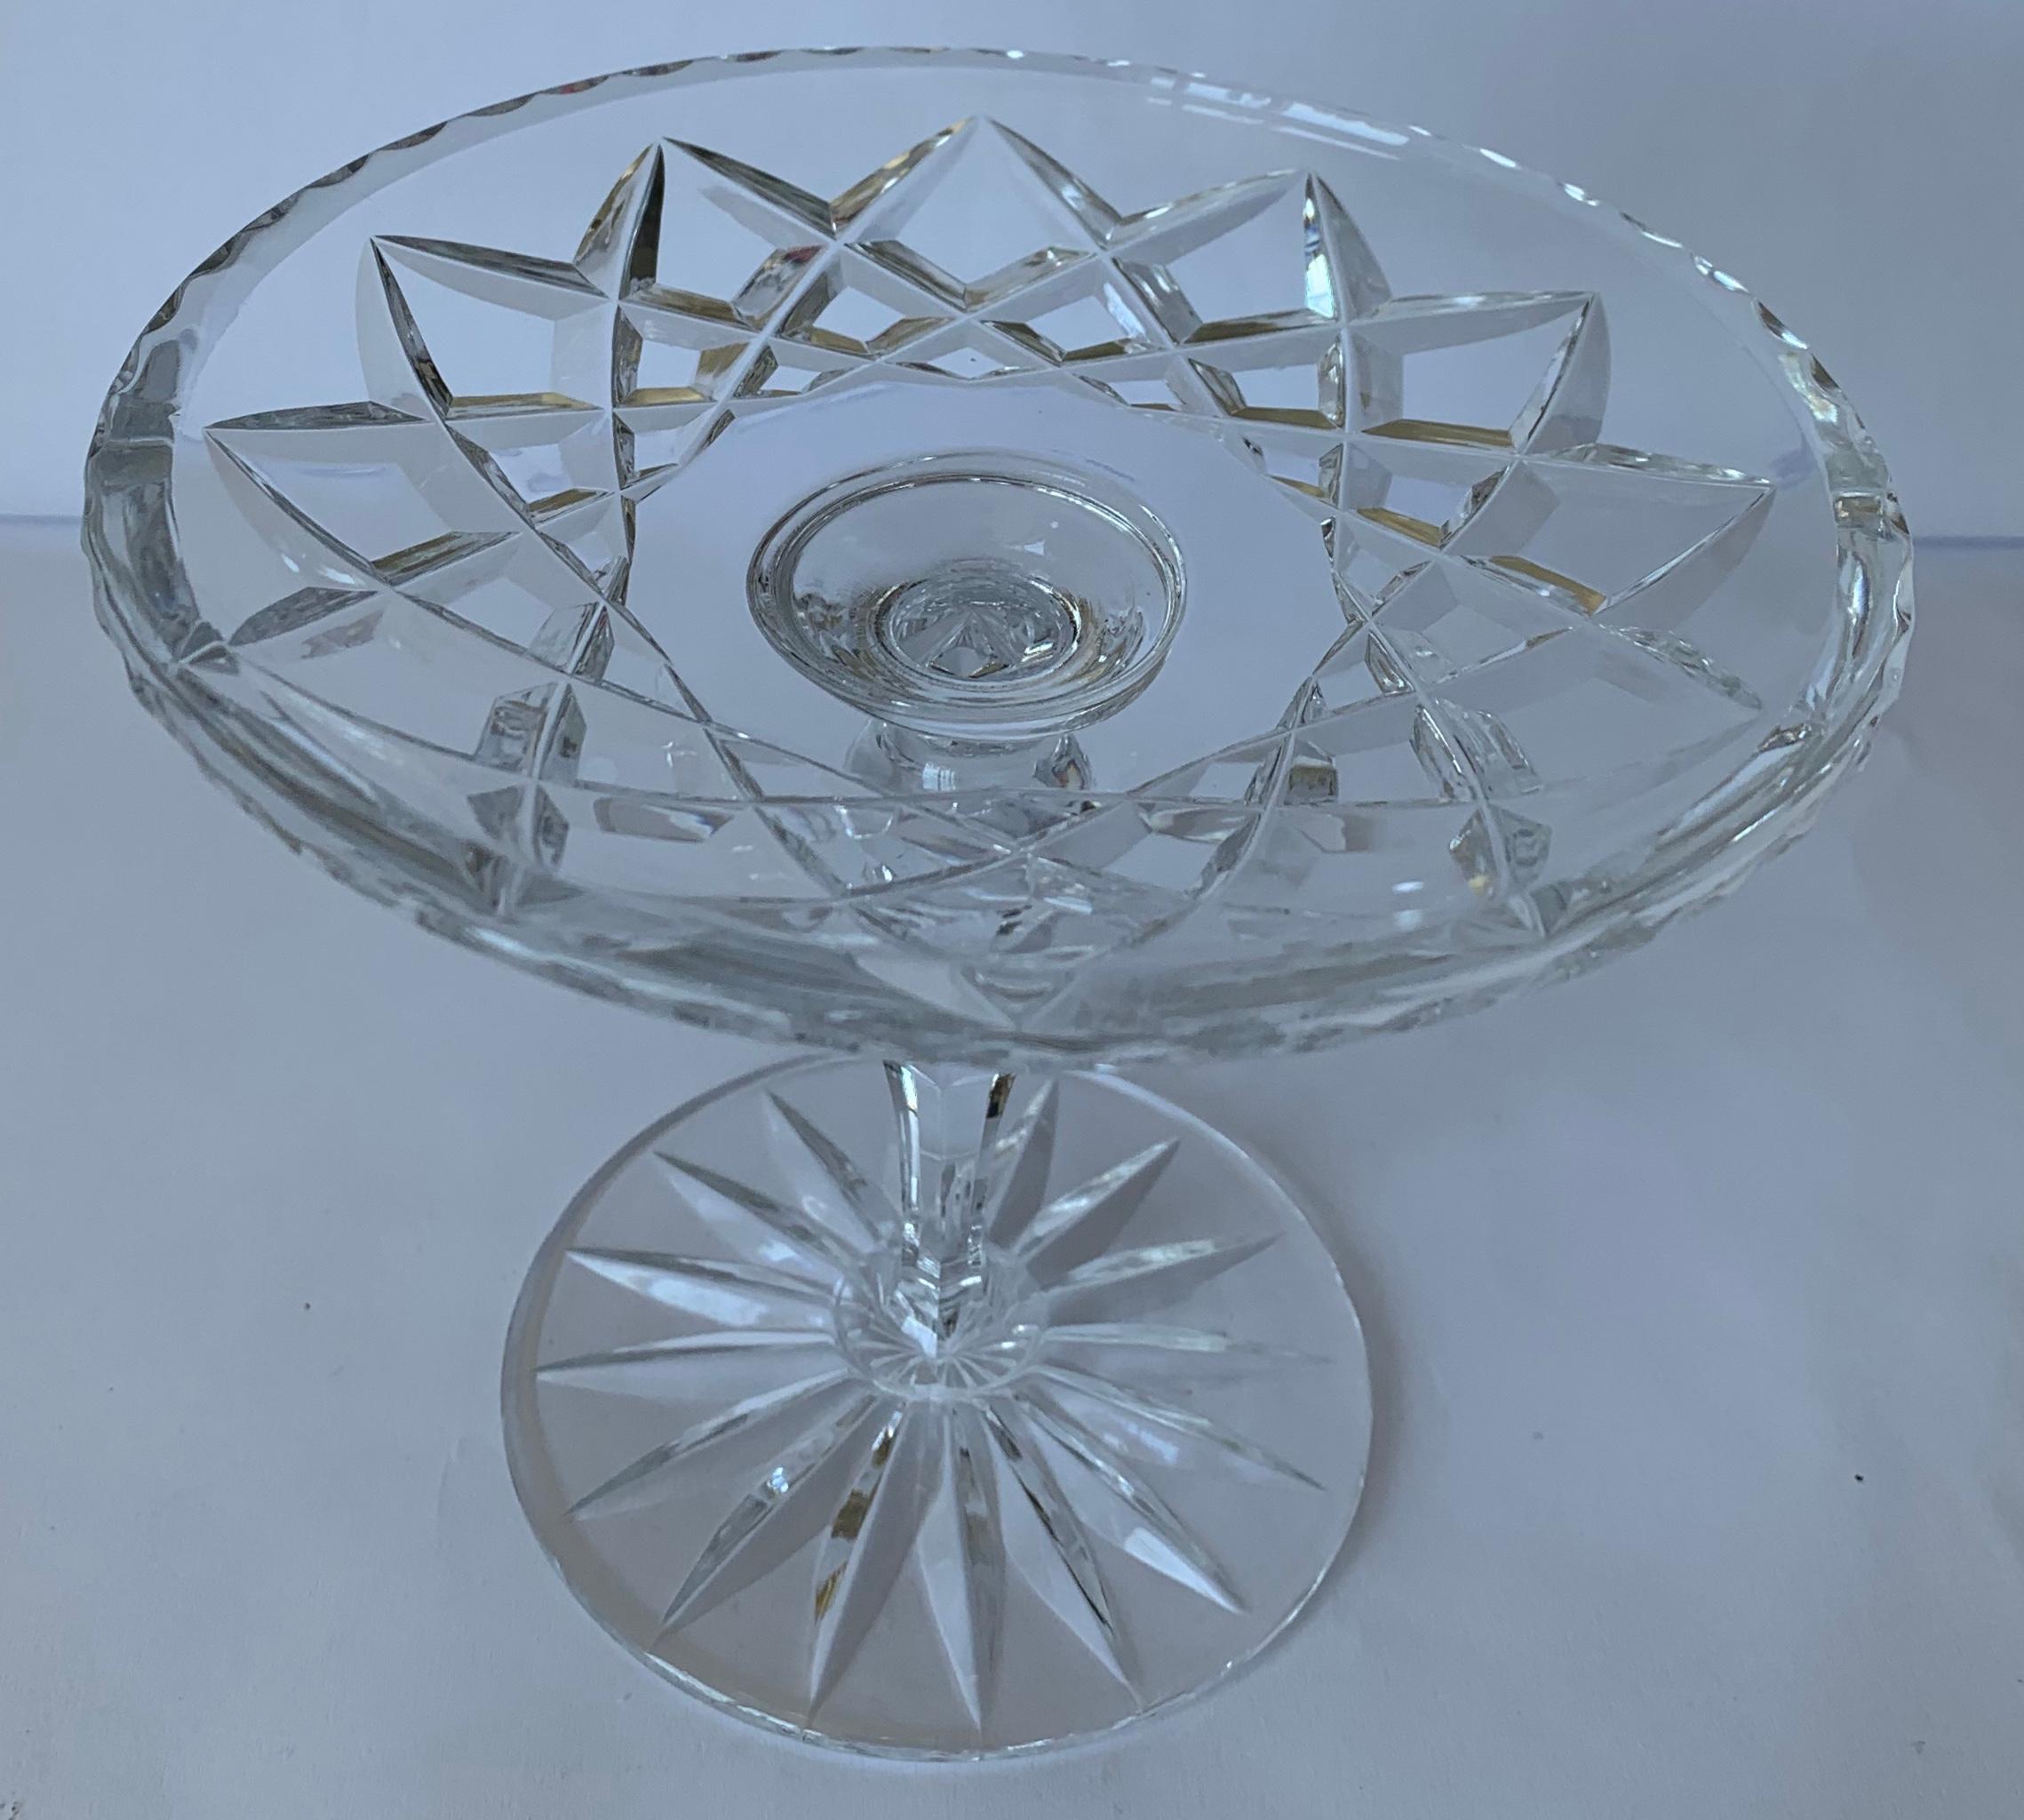 1930s American cut crystal footed compote. Faceted cut crystal. No makers mark or signature.